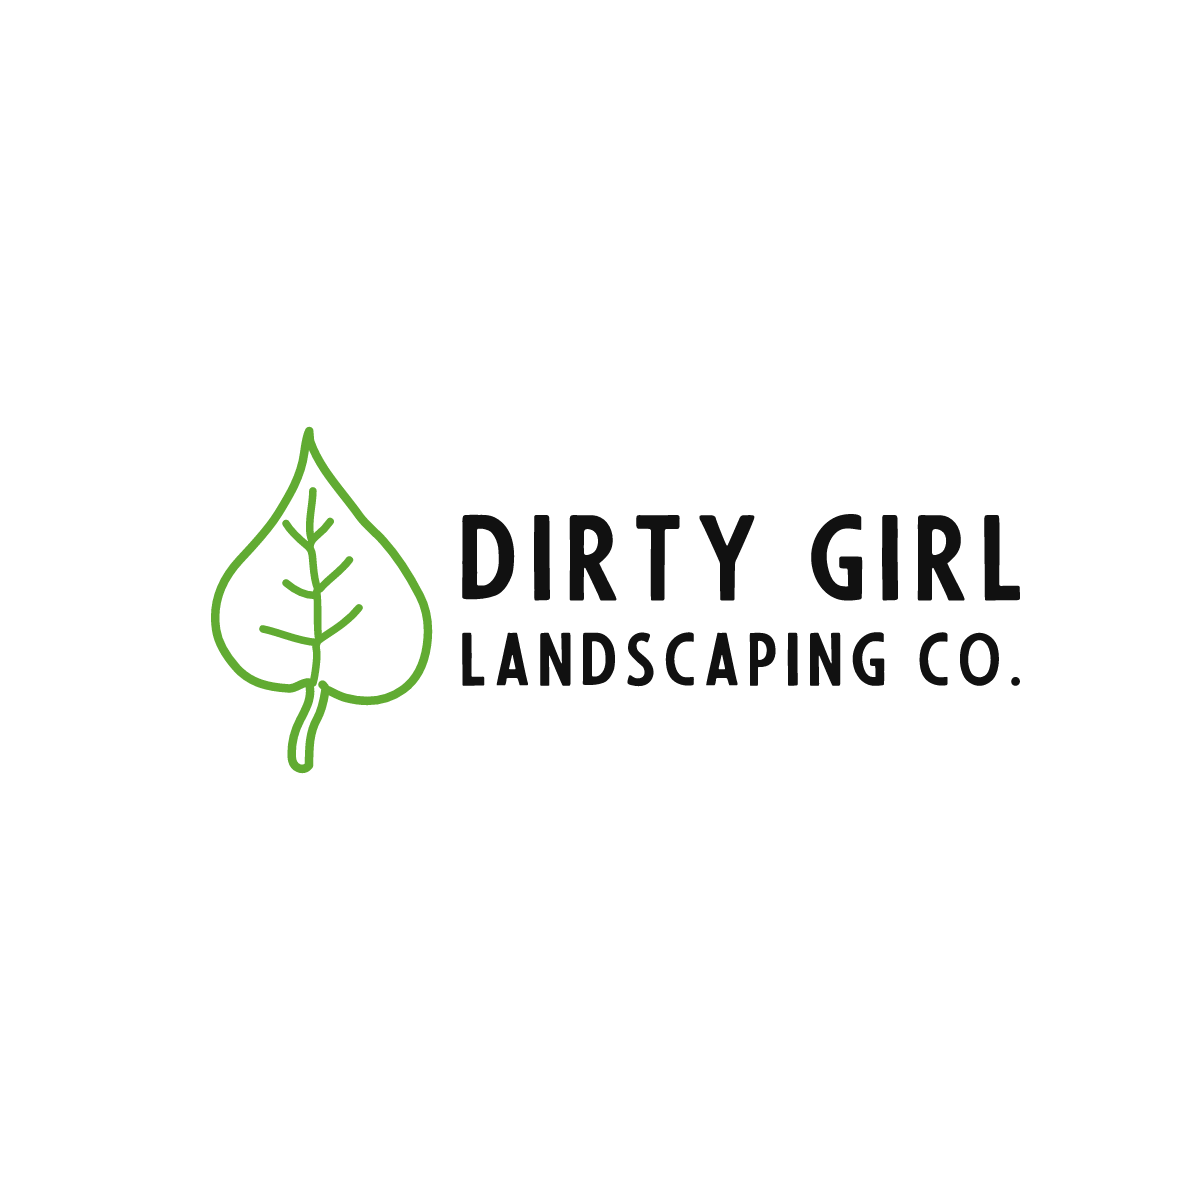 Dirty Girl Landscaping Co.